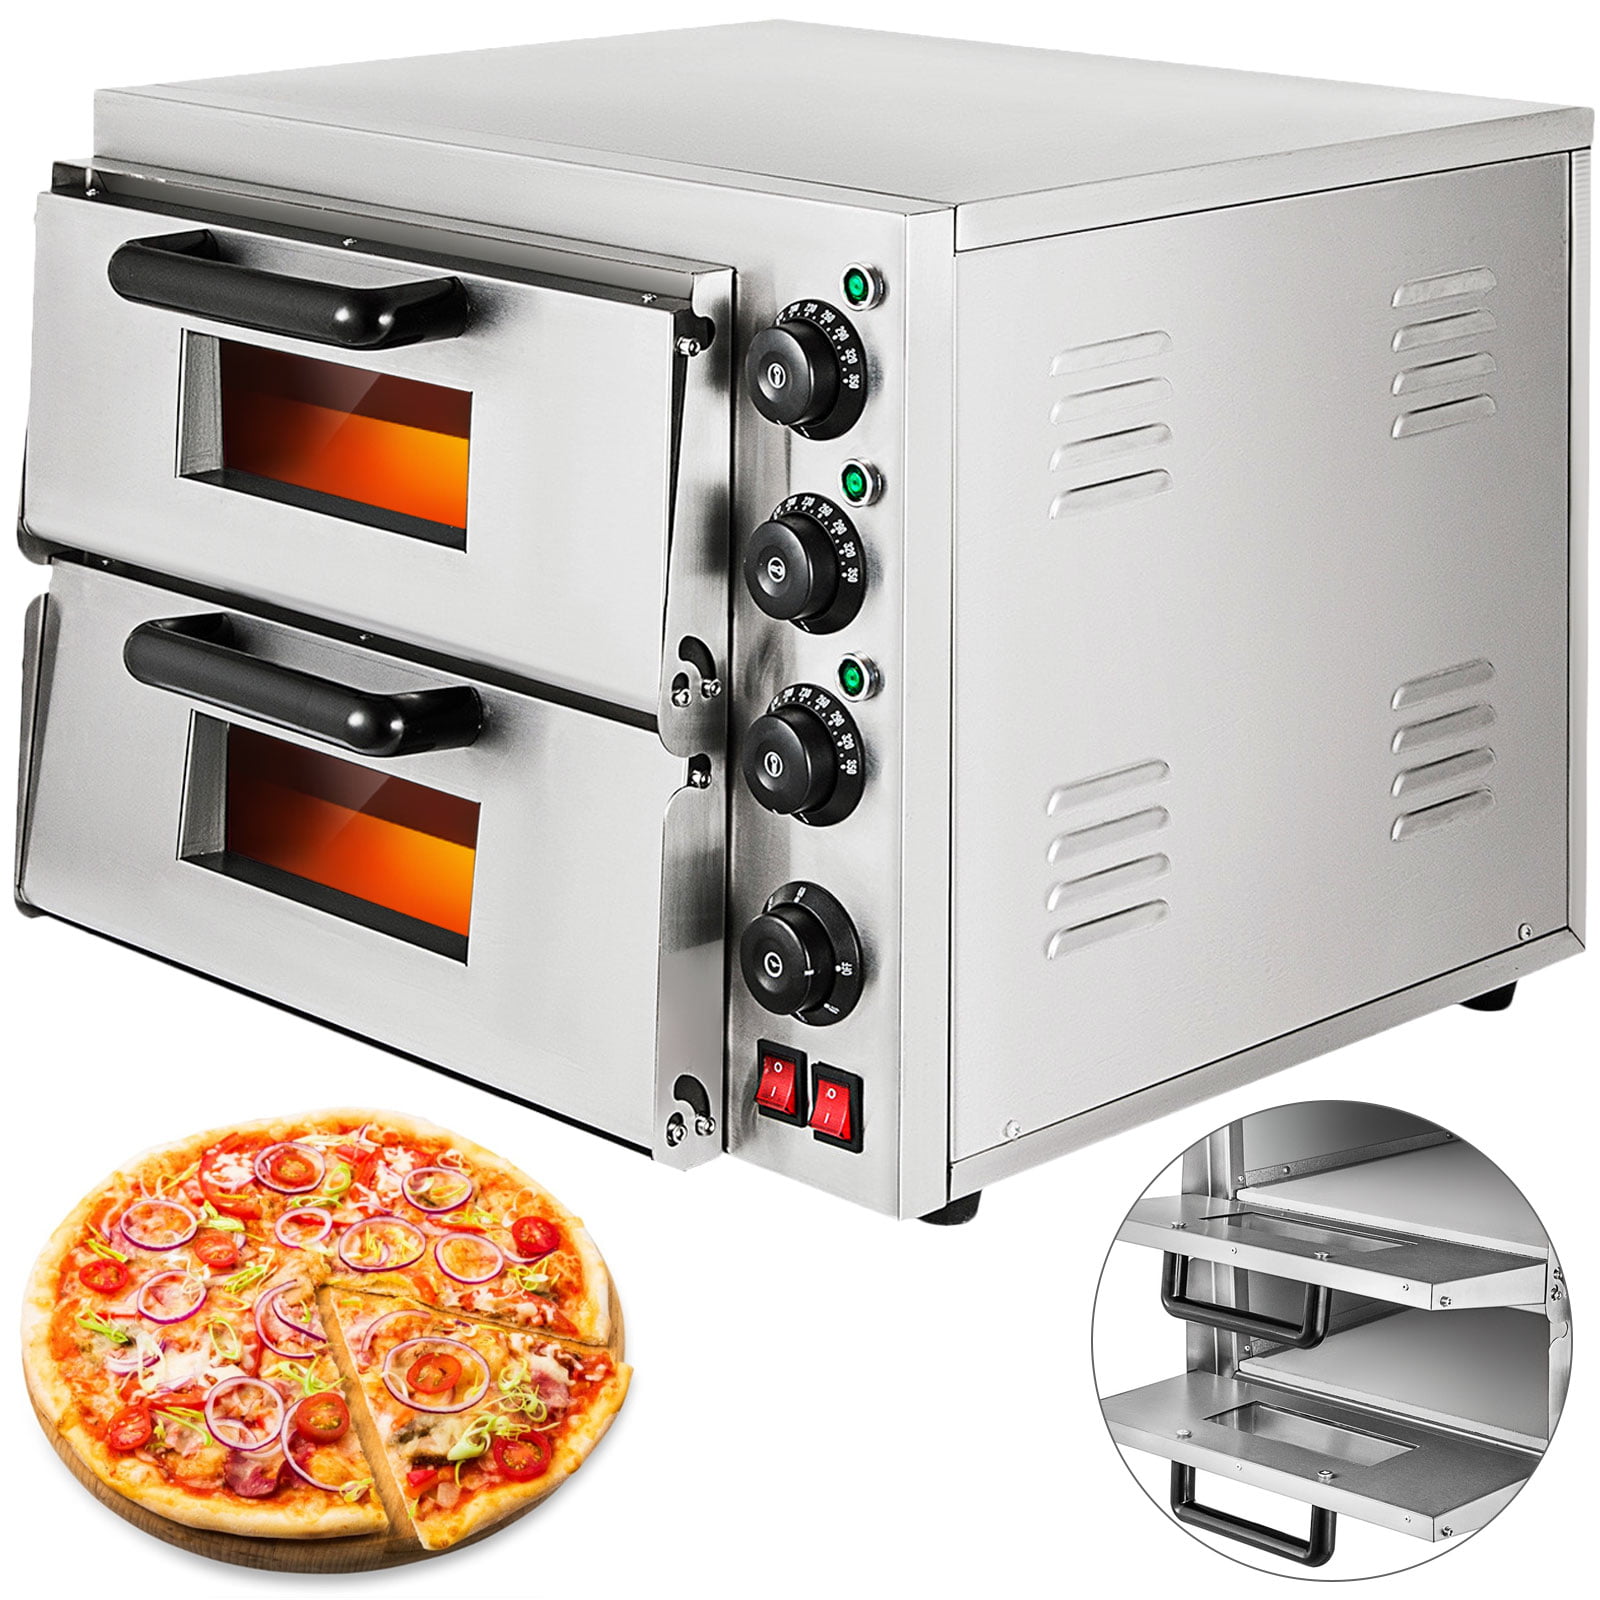 Vevor 14 Commercial Pizza Oven, Commercial Countertop Oven Reviews